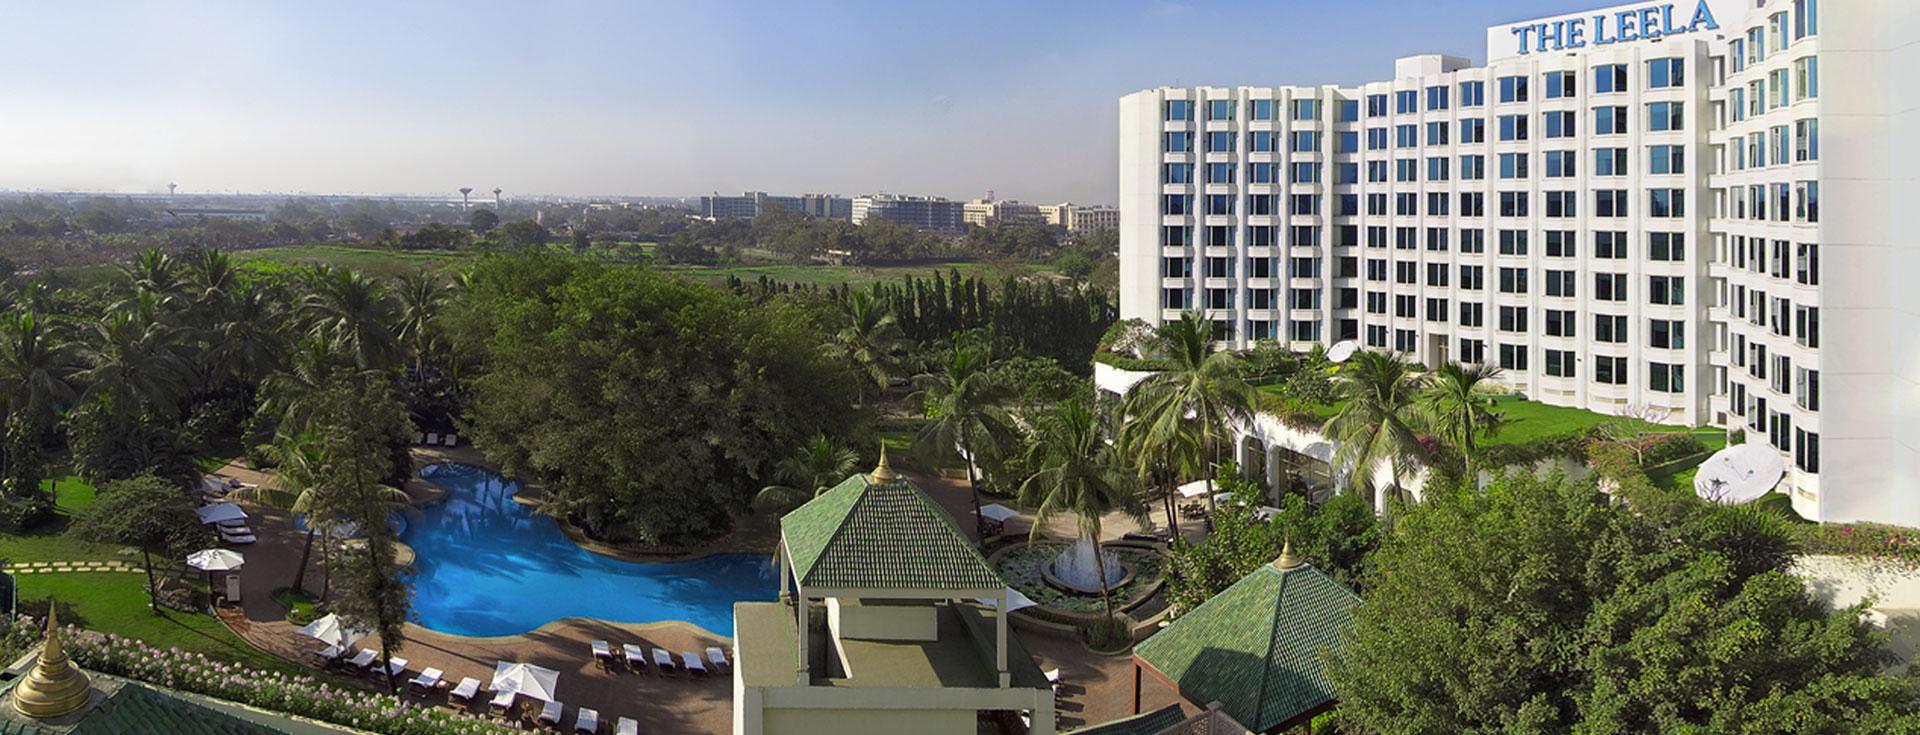 Why The Leela Mumbai Is favourite amongst business travellers